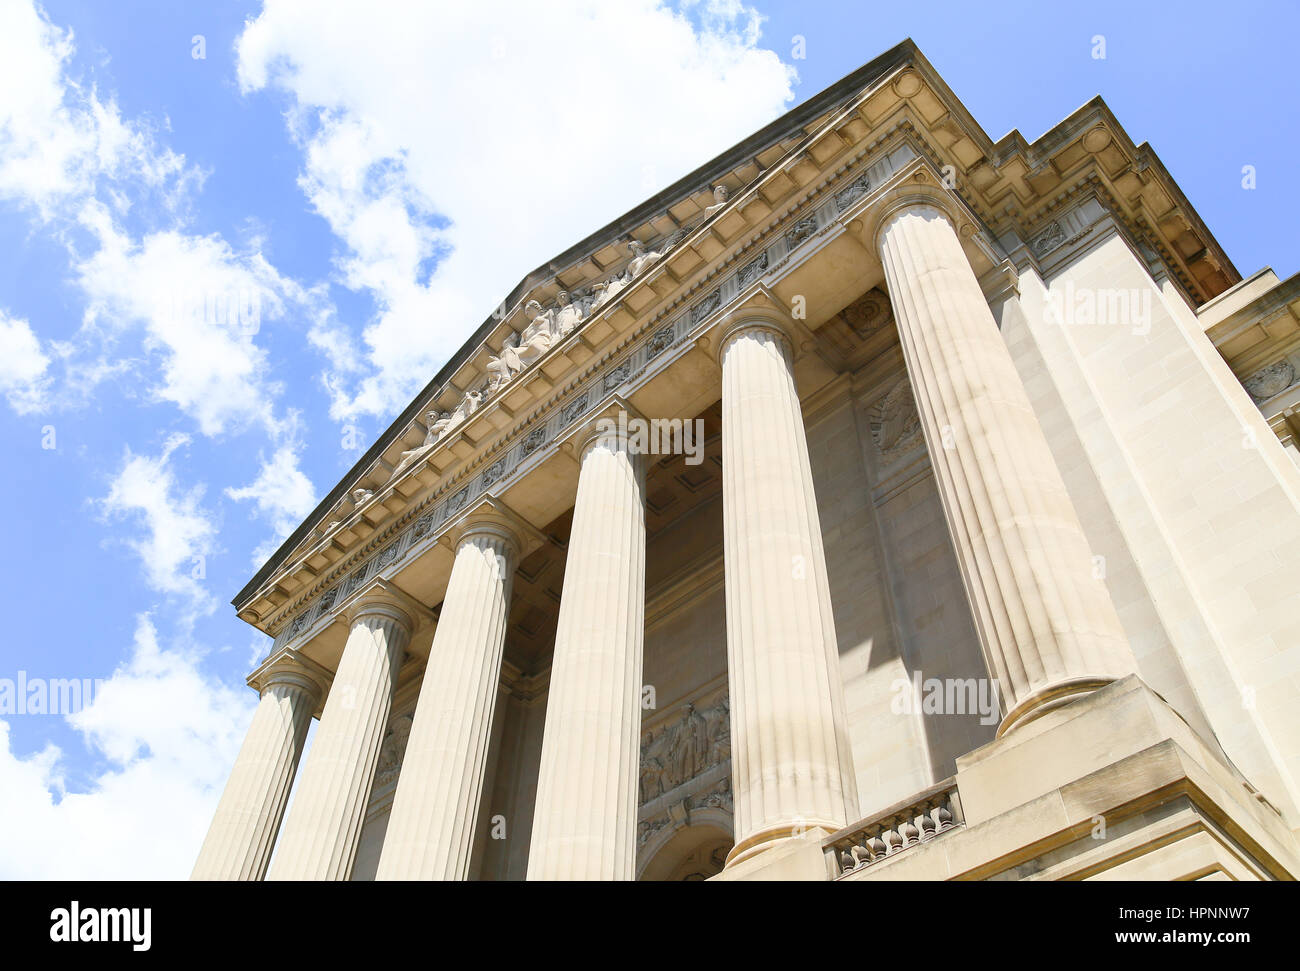 Washington DC, USA - May 2, 2015: Part of the facade of the Herbert C. Hoover Building, Headquarters of the United States Department of Commerce. Stock Photo